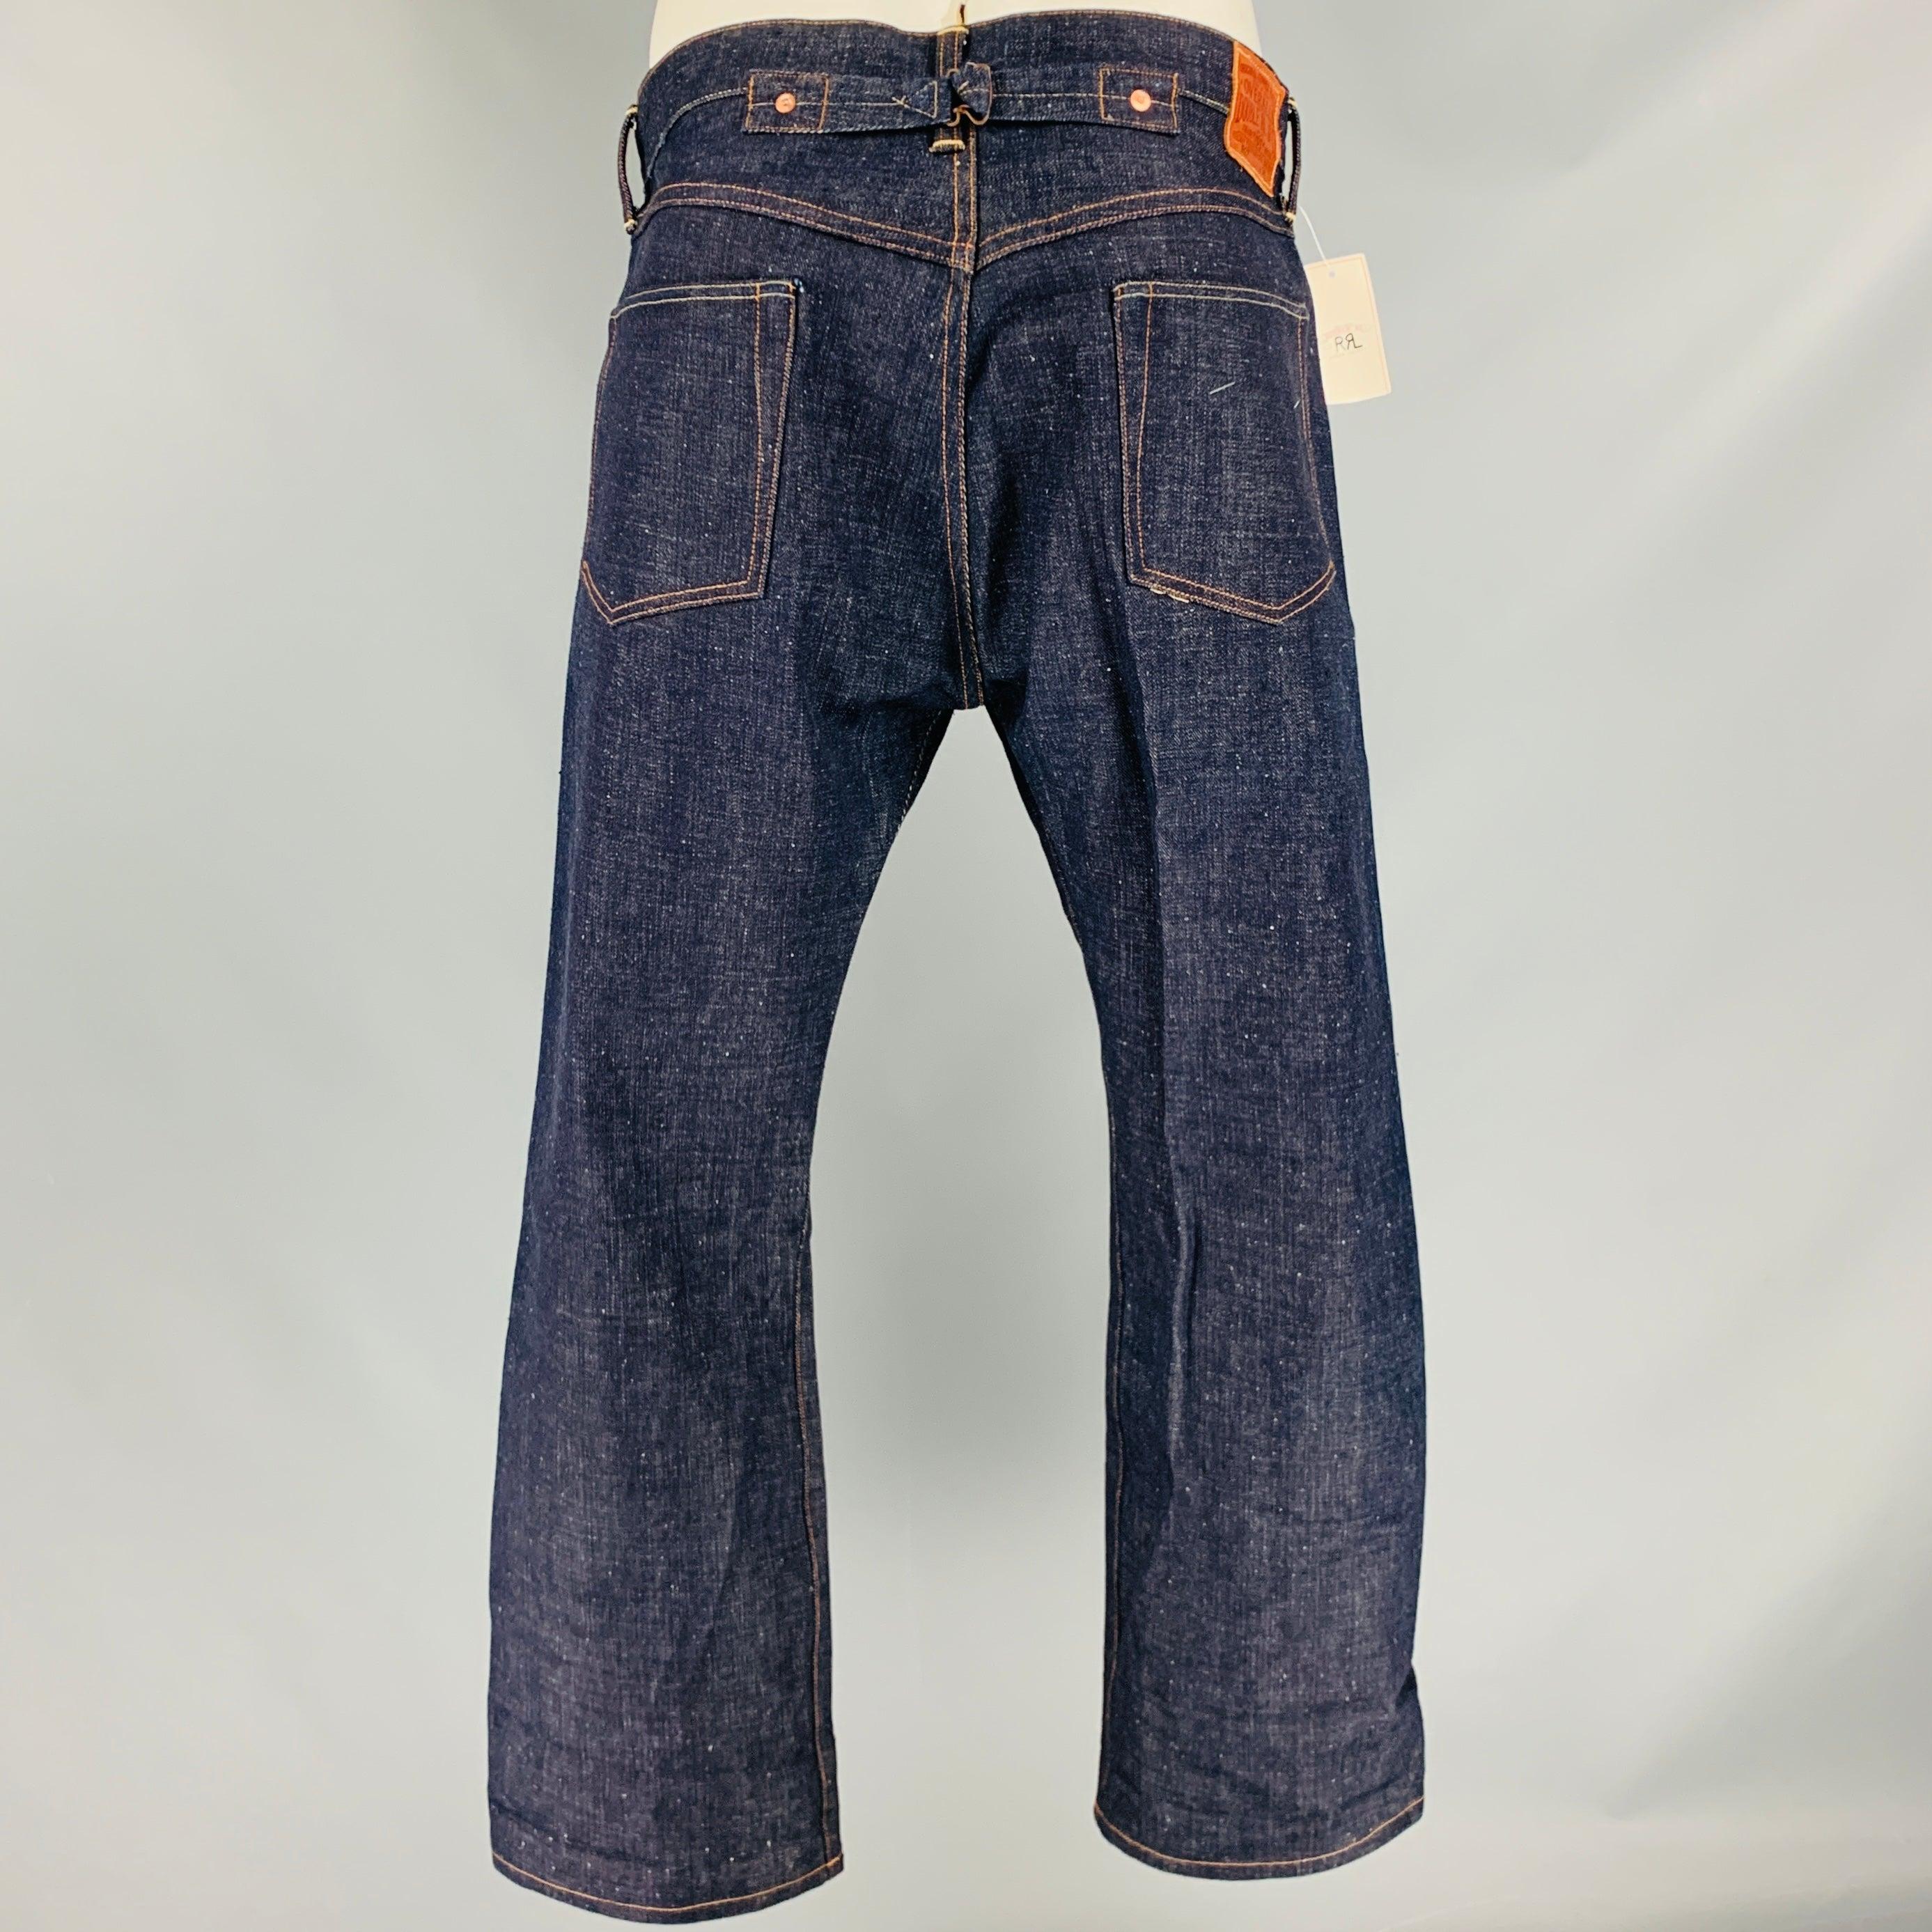 RRL by RALPH LAUREN jeans
in an indigo selvedge denim cotton fabric featuring yellow contrast stitching, back cinch, and button fly closure. Made in USA. Note: this item has been altered, please check the measurements.Excellent Pre-Owned Condition.